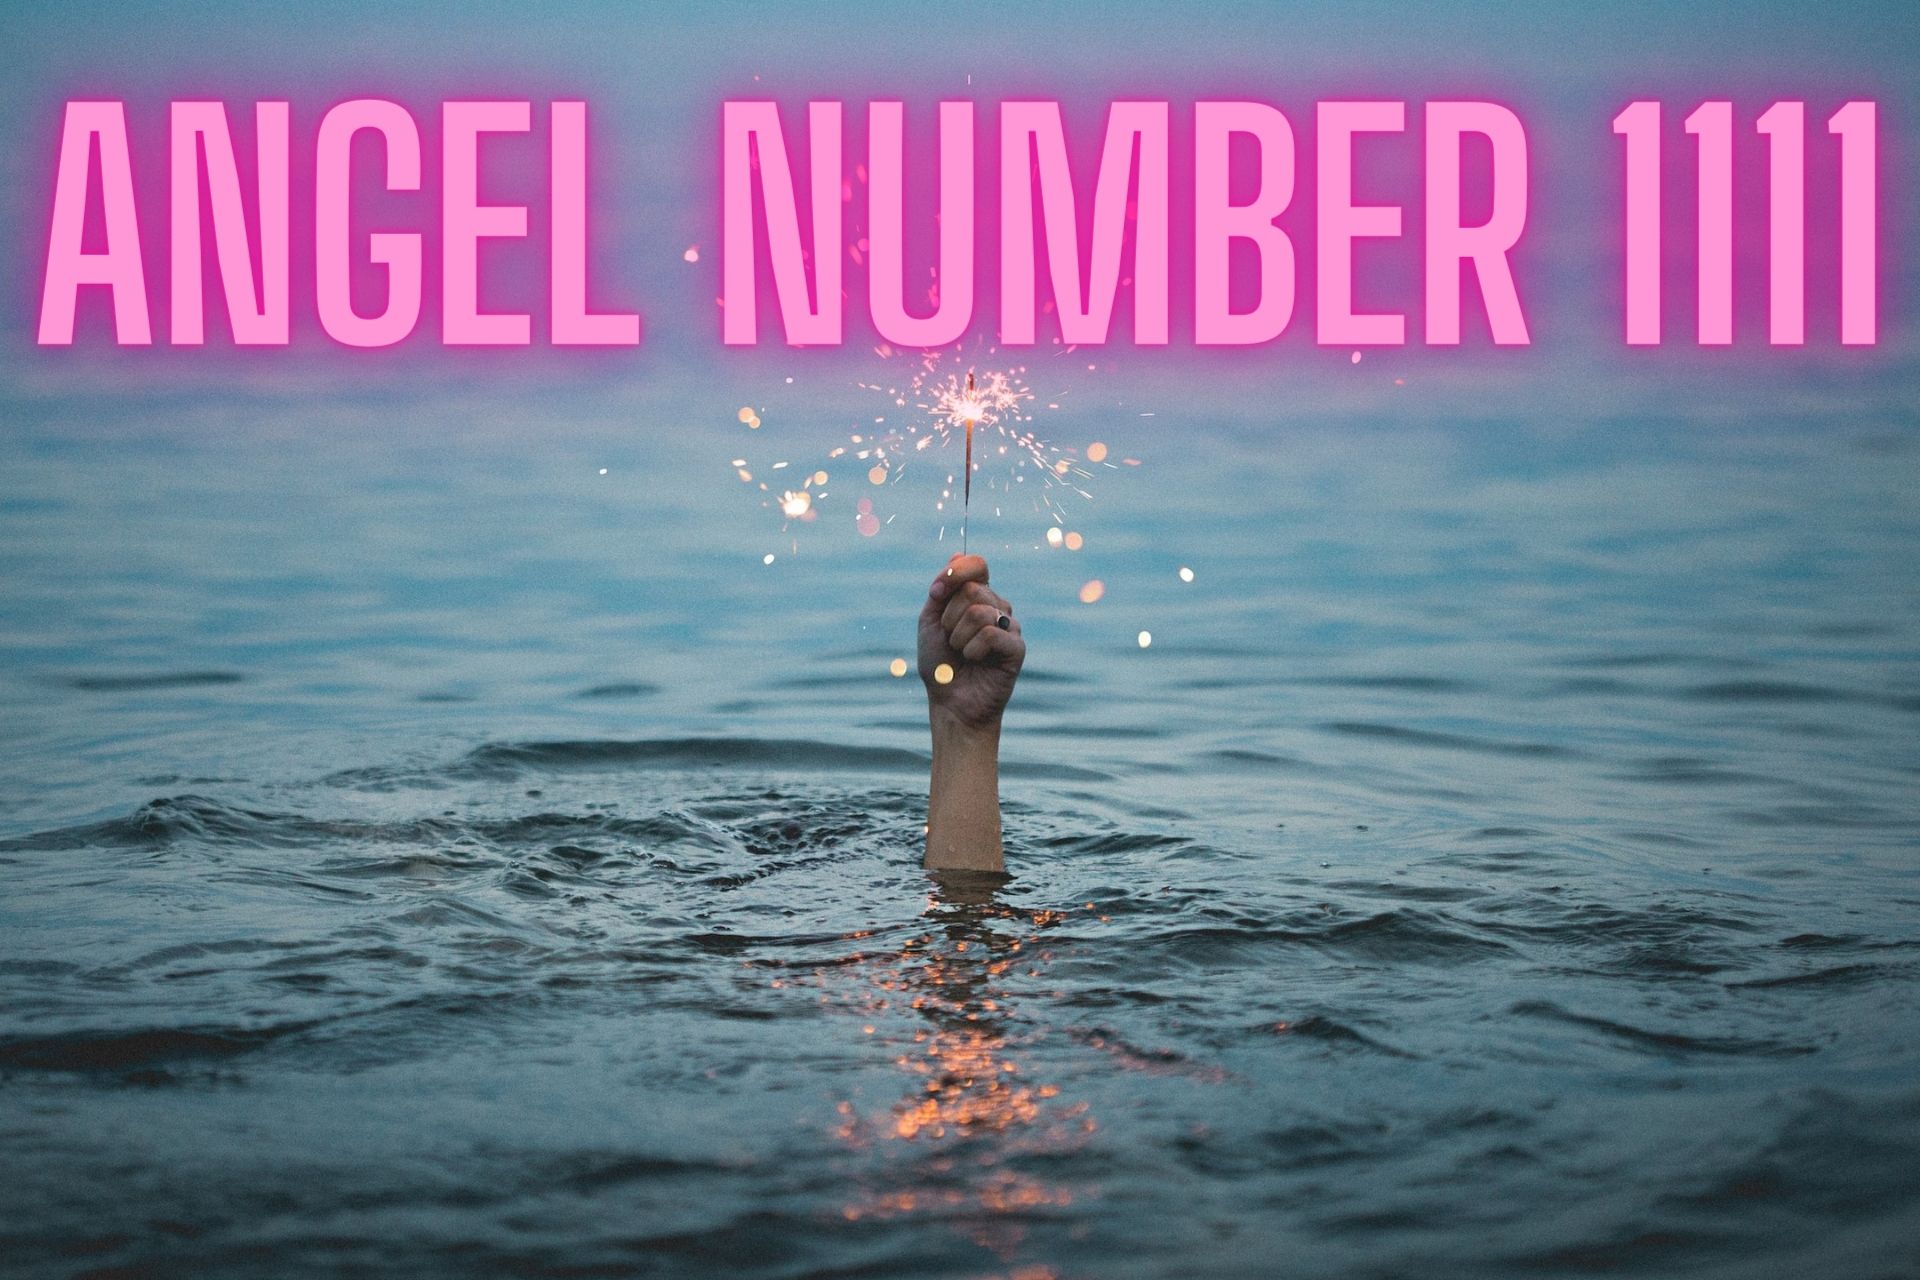 Angel Number For Healing 1111 - The Reason For Its Constant Appearance